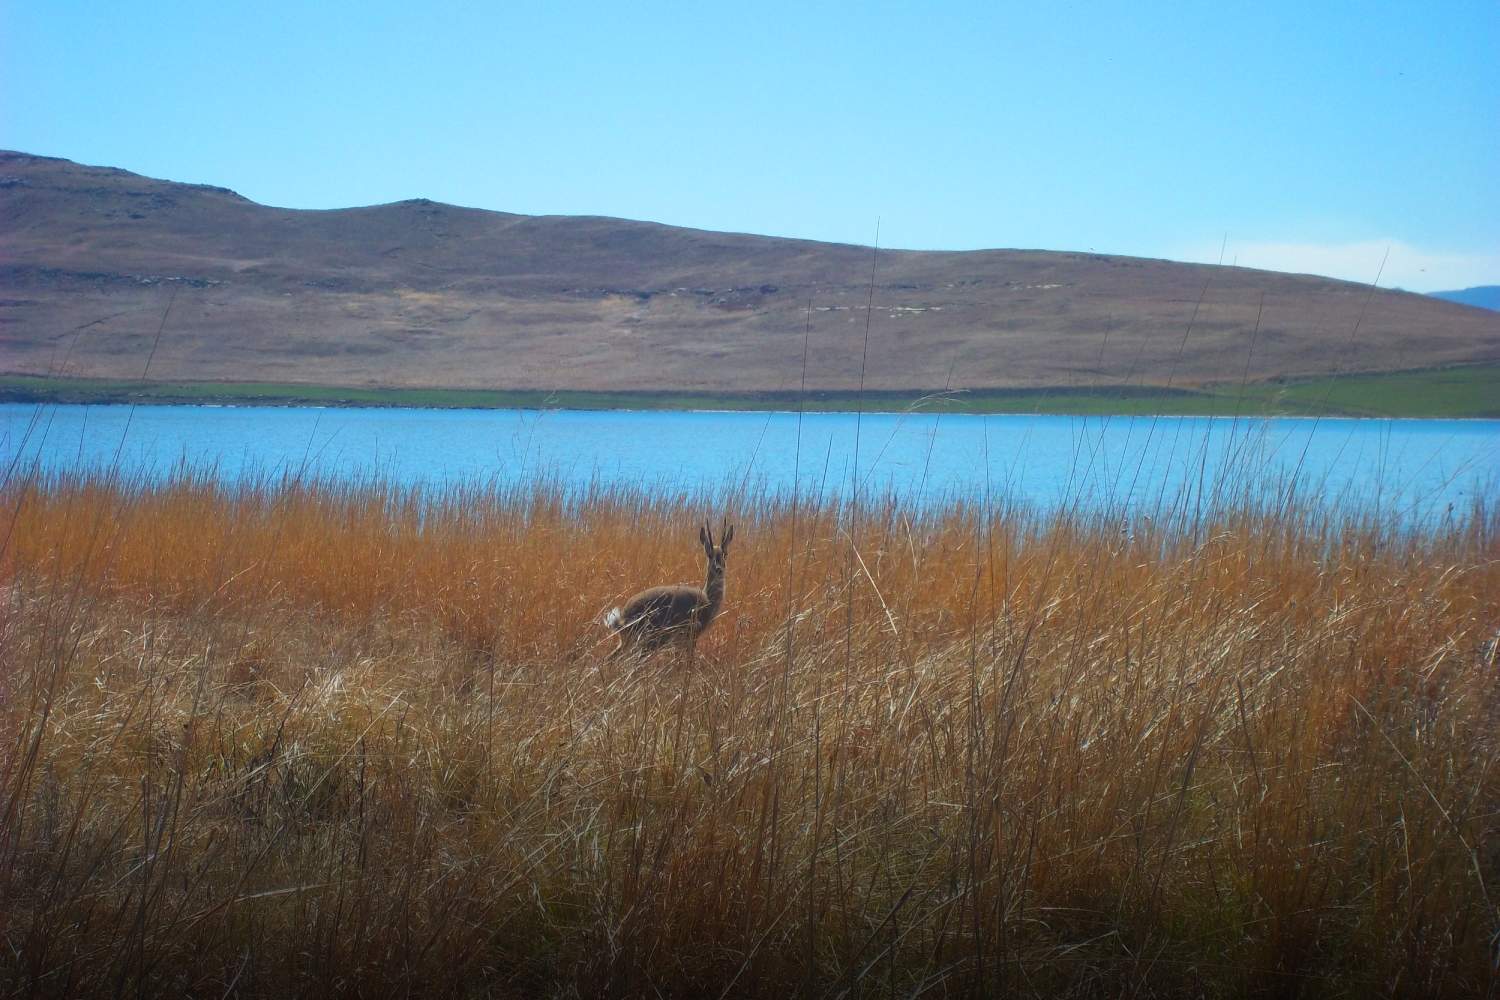 Free State travel guide When to visit, Places to visit, Safety suggestions Sterkfontein dam nature reserve